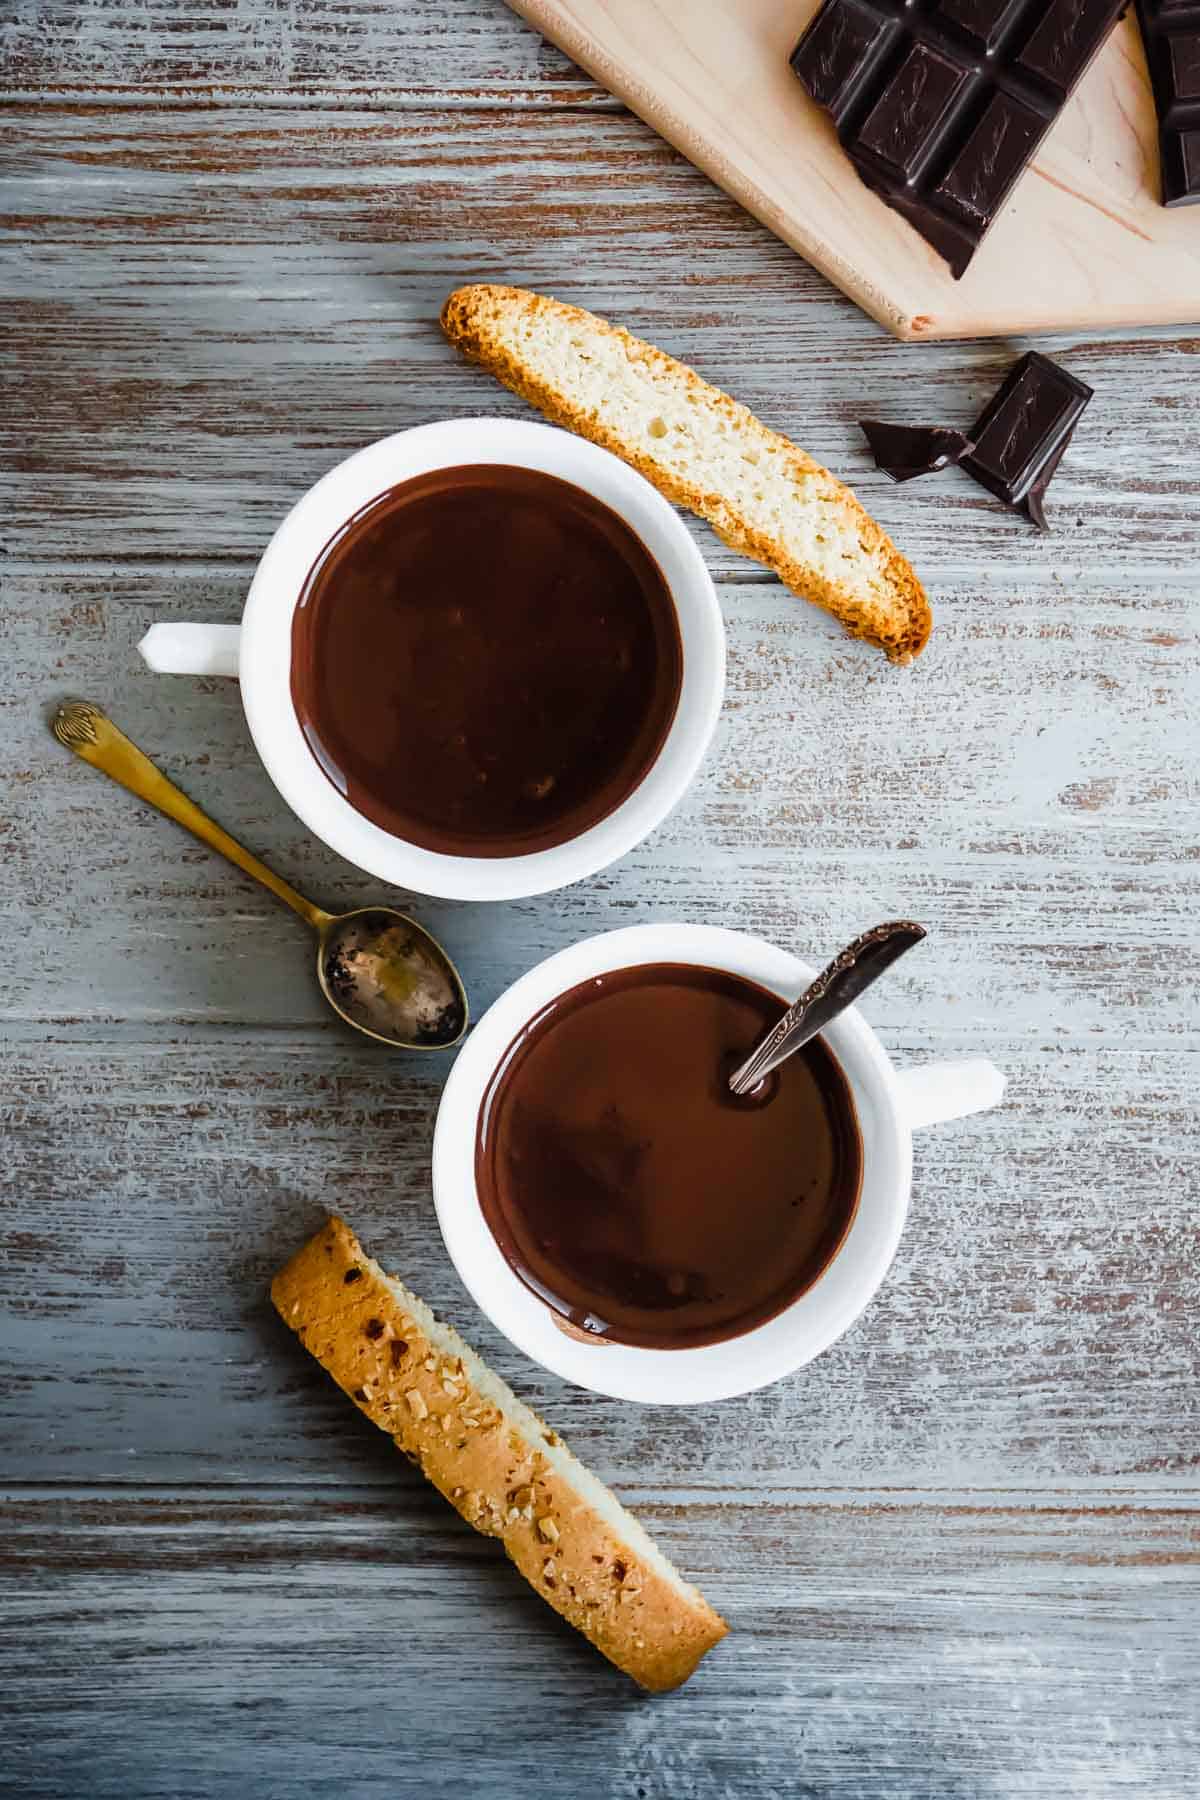 Two cups of Italian hot chocolate (Cioccolato Caldo) with two spoons and two pieces of biscotti.